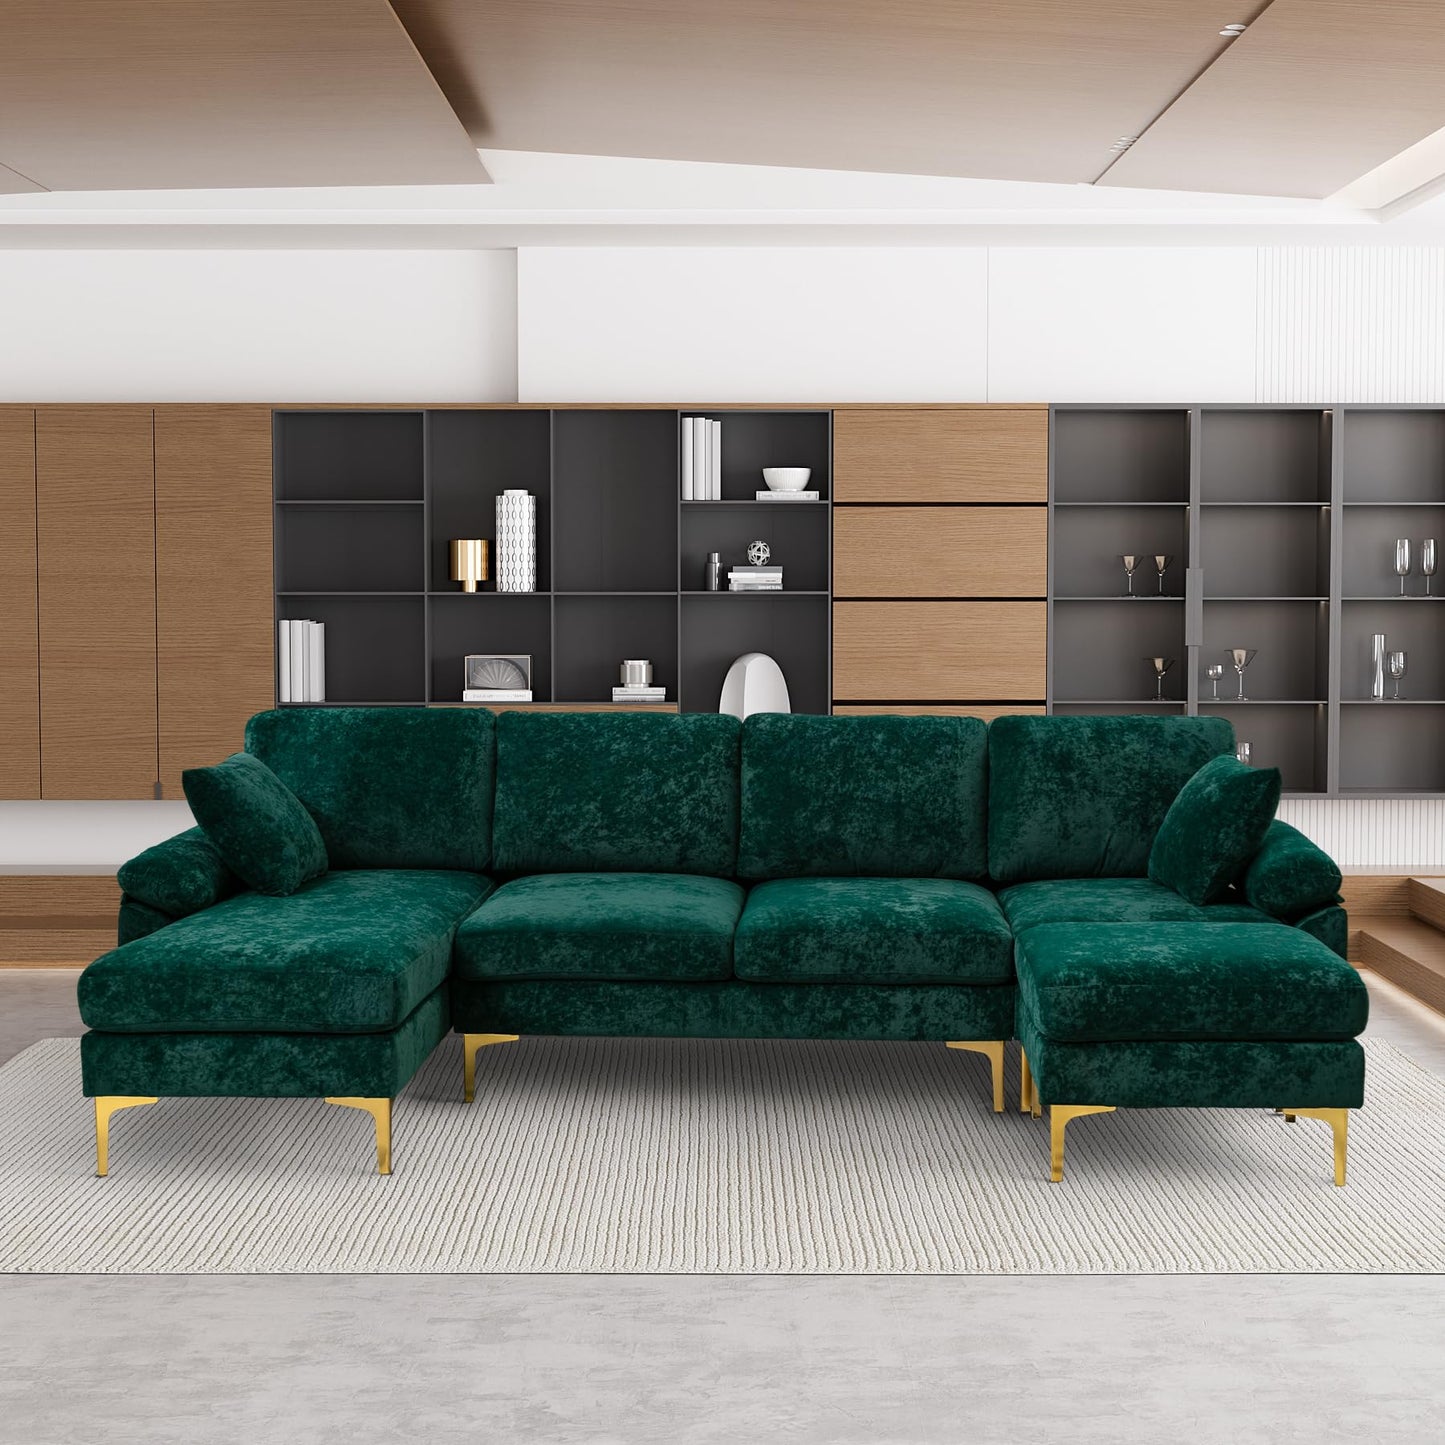 OUYESSIR U-Shaped Sectional Sofa Couch, 4 Seat Sofa Set for Living Room, Convertible L-Shaped Velvet Couch Set with Reversible Chaise Lounge, Ottoman and Pillows,114 inches (Emerald Green)